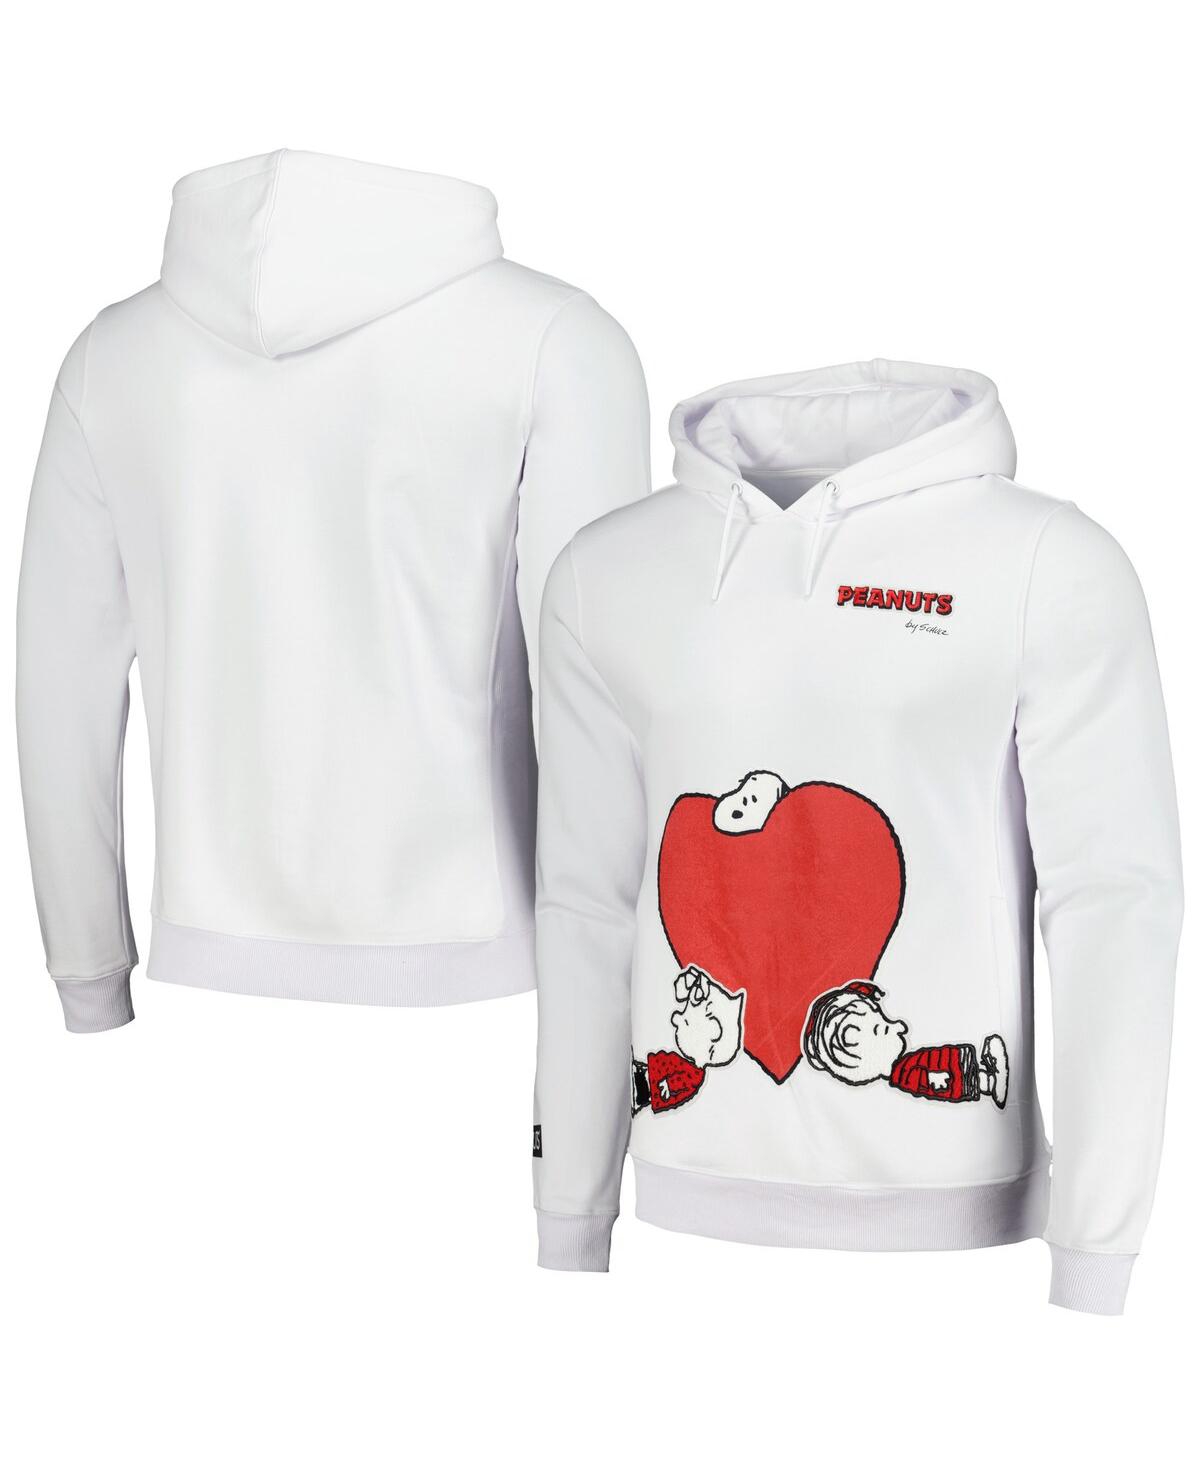 Men's White Peanuts Snoopy Loves Flowers Pullover Hoodie - White